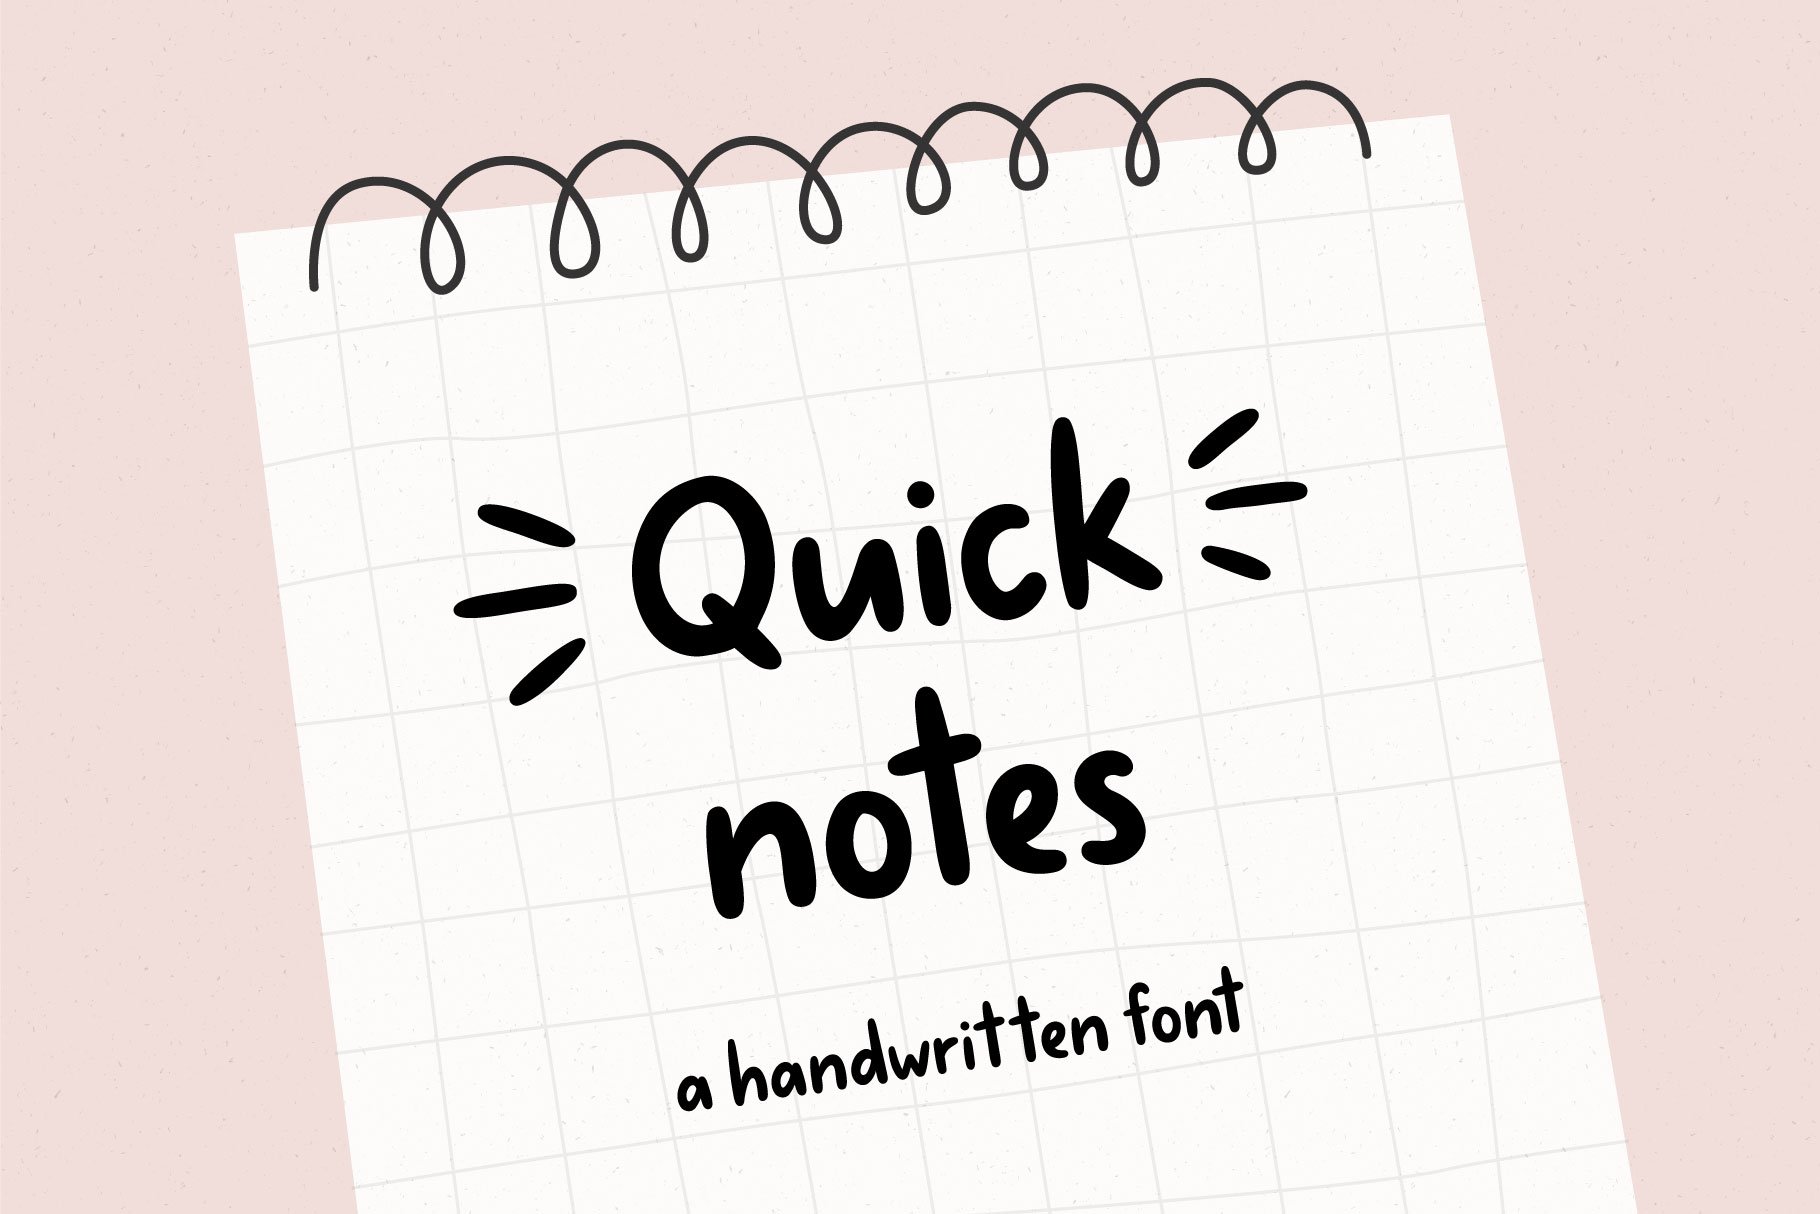 Quick notes | Handwritten Font cover image.